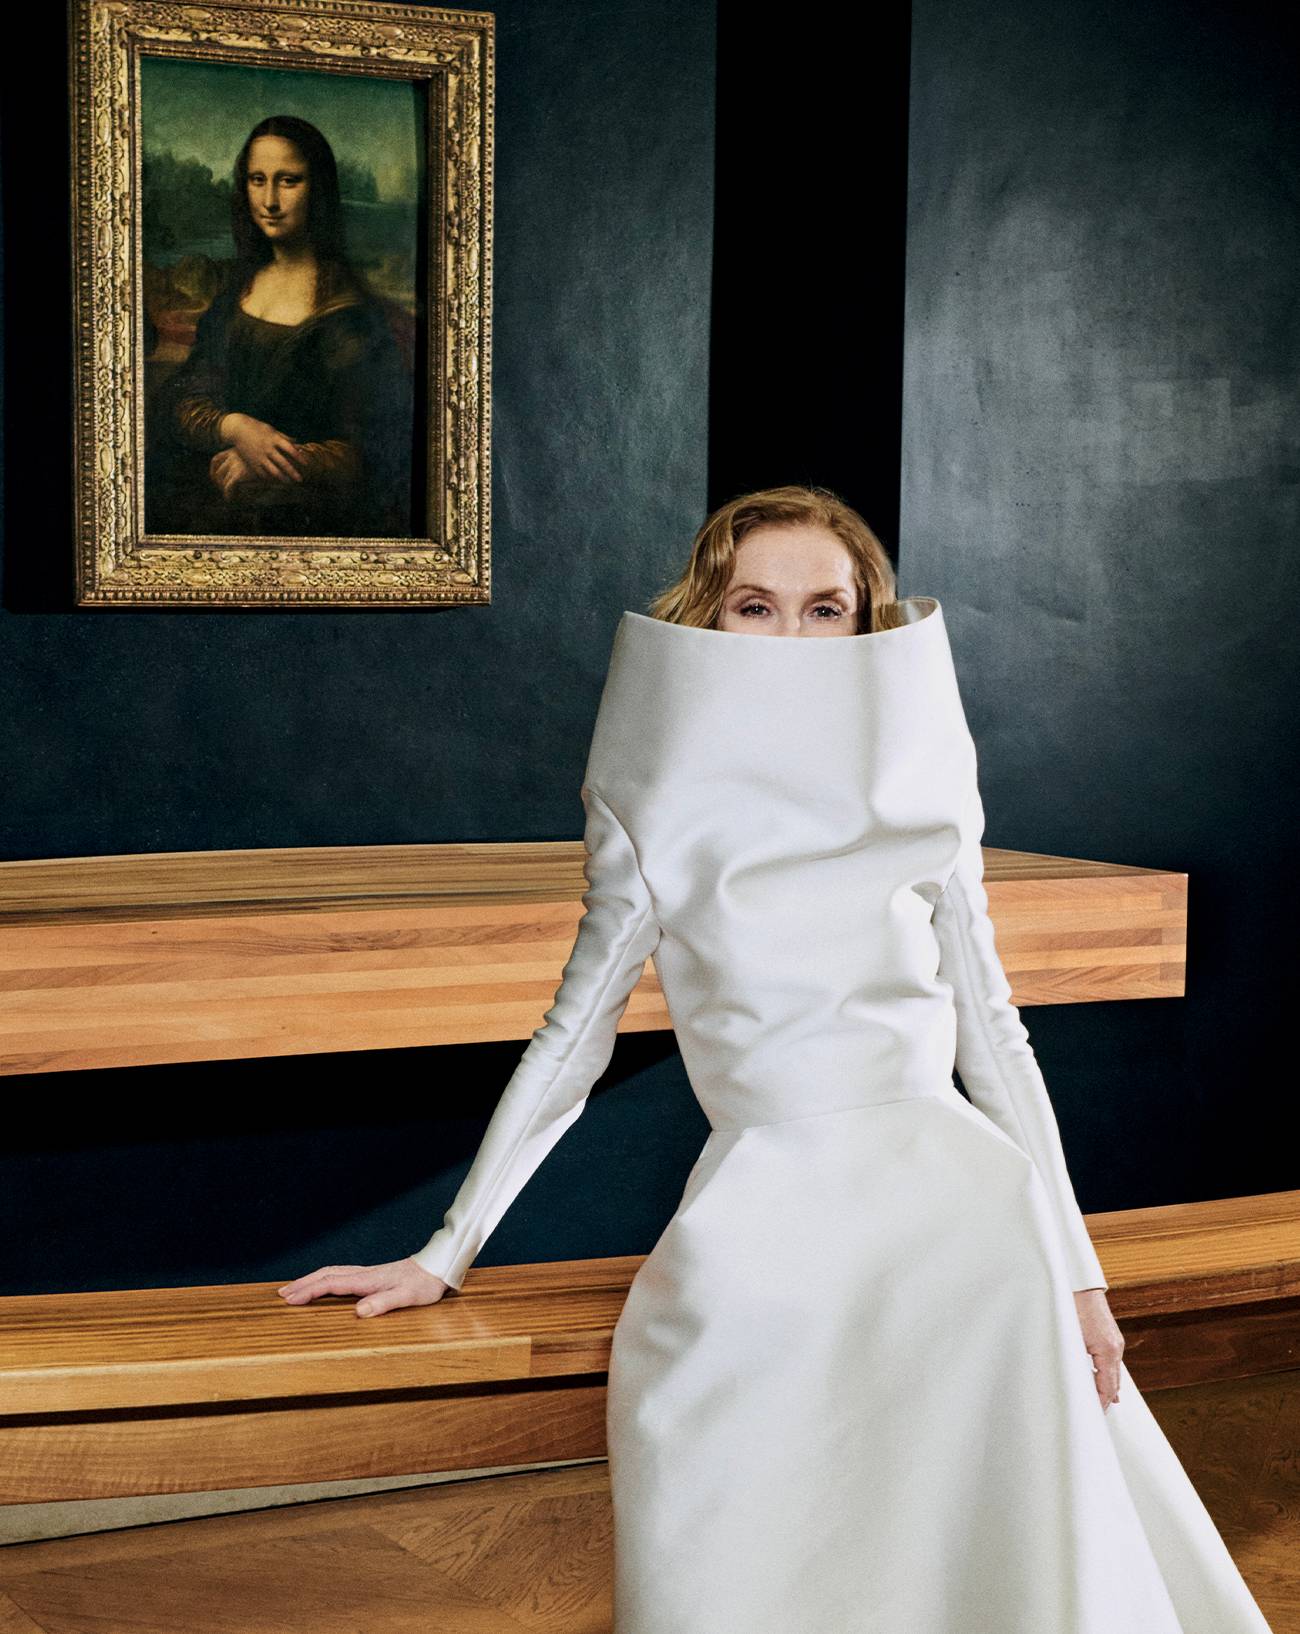 Interview with Isabelle Huppert at the Louvre for Numéro art